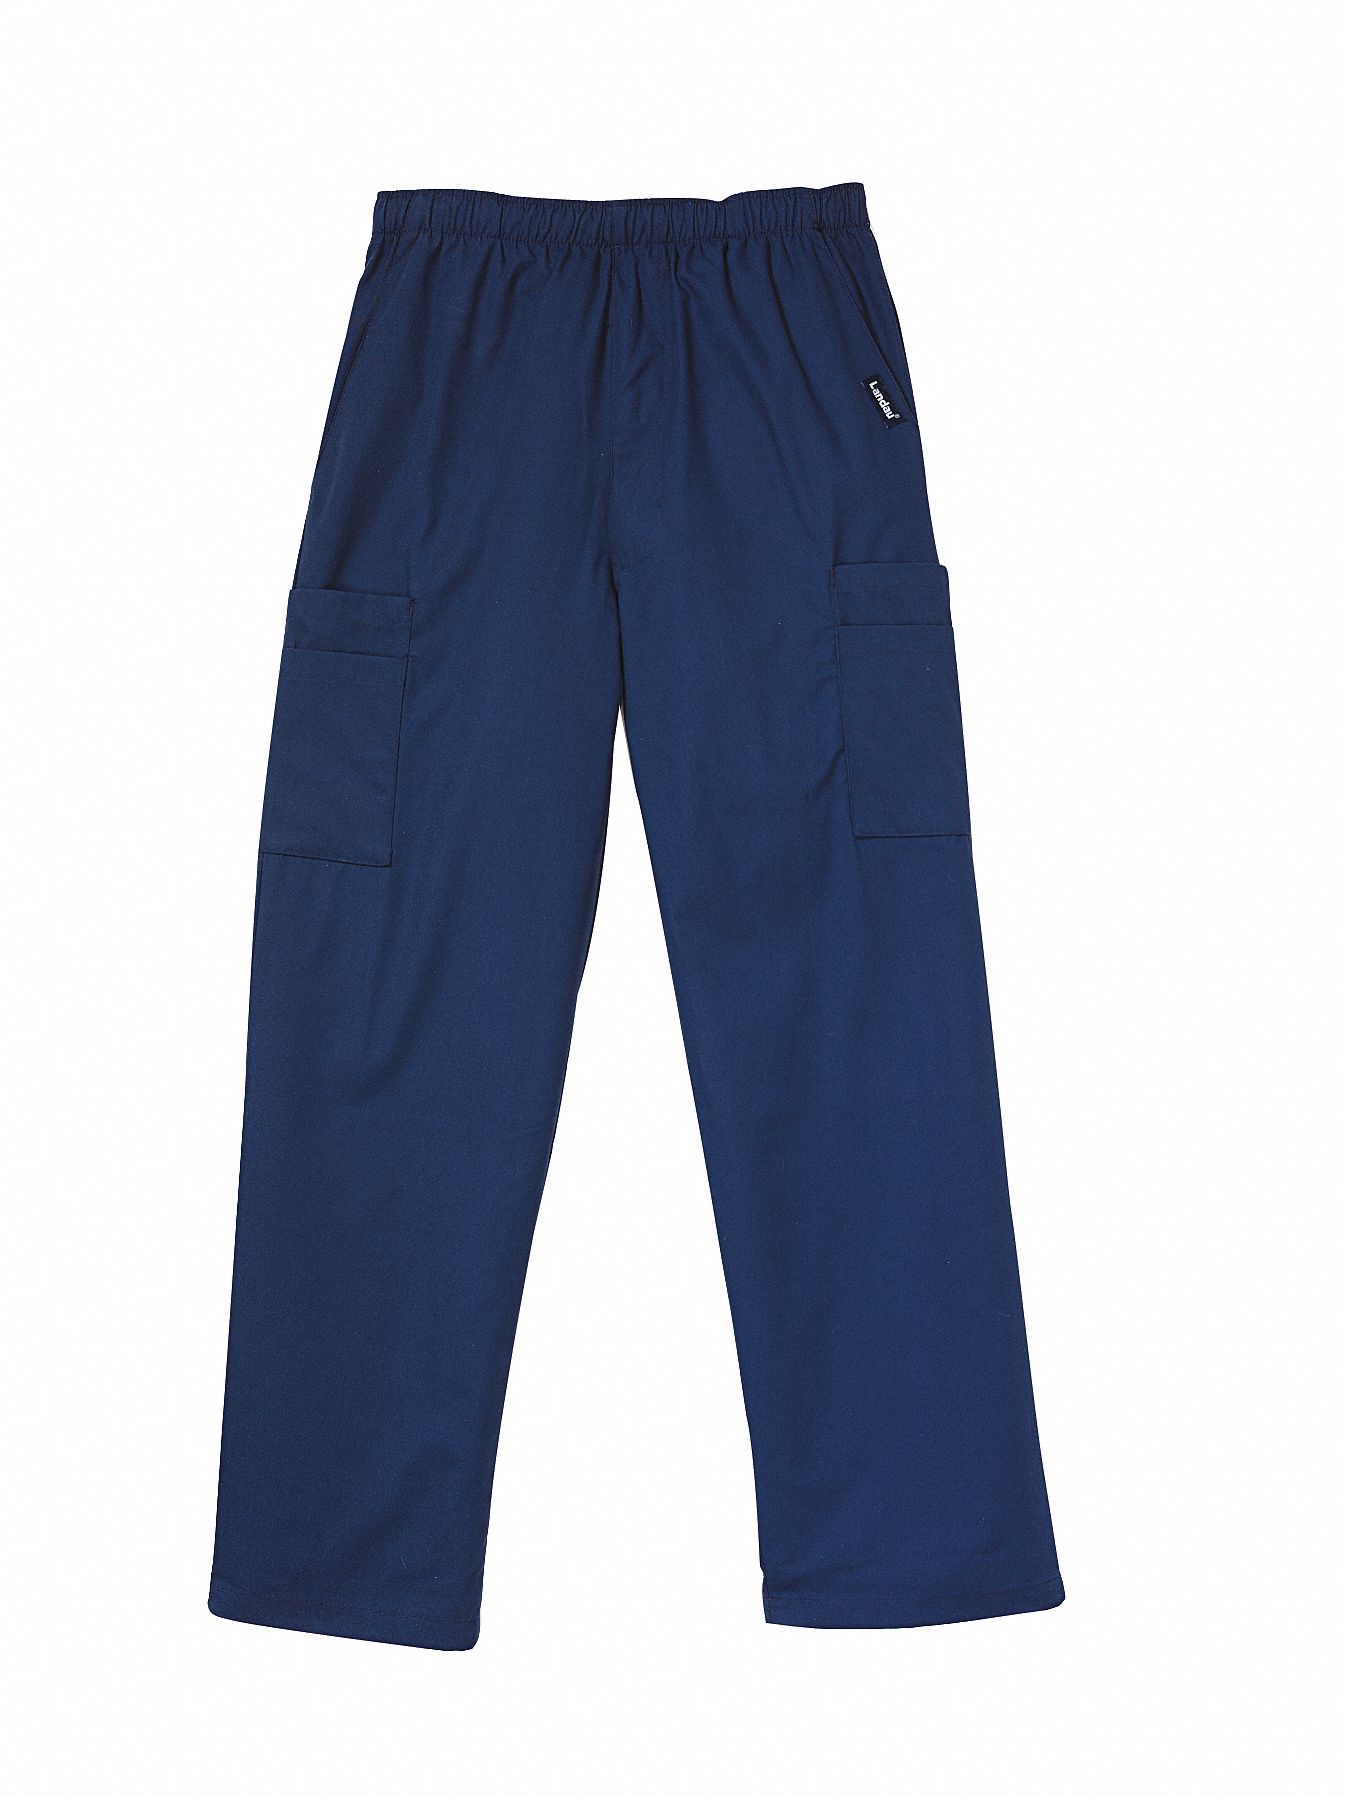 Scrub Cargo Pants: Navy, Men's, 34 in x 31 in, M, Cotton/Polyester, Pants, 5 Pockets